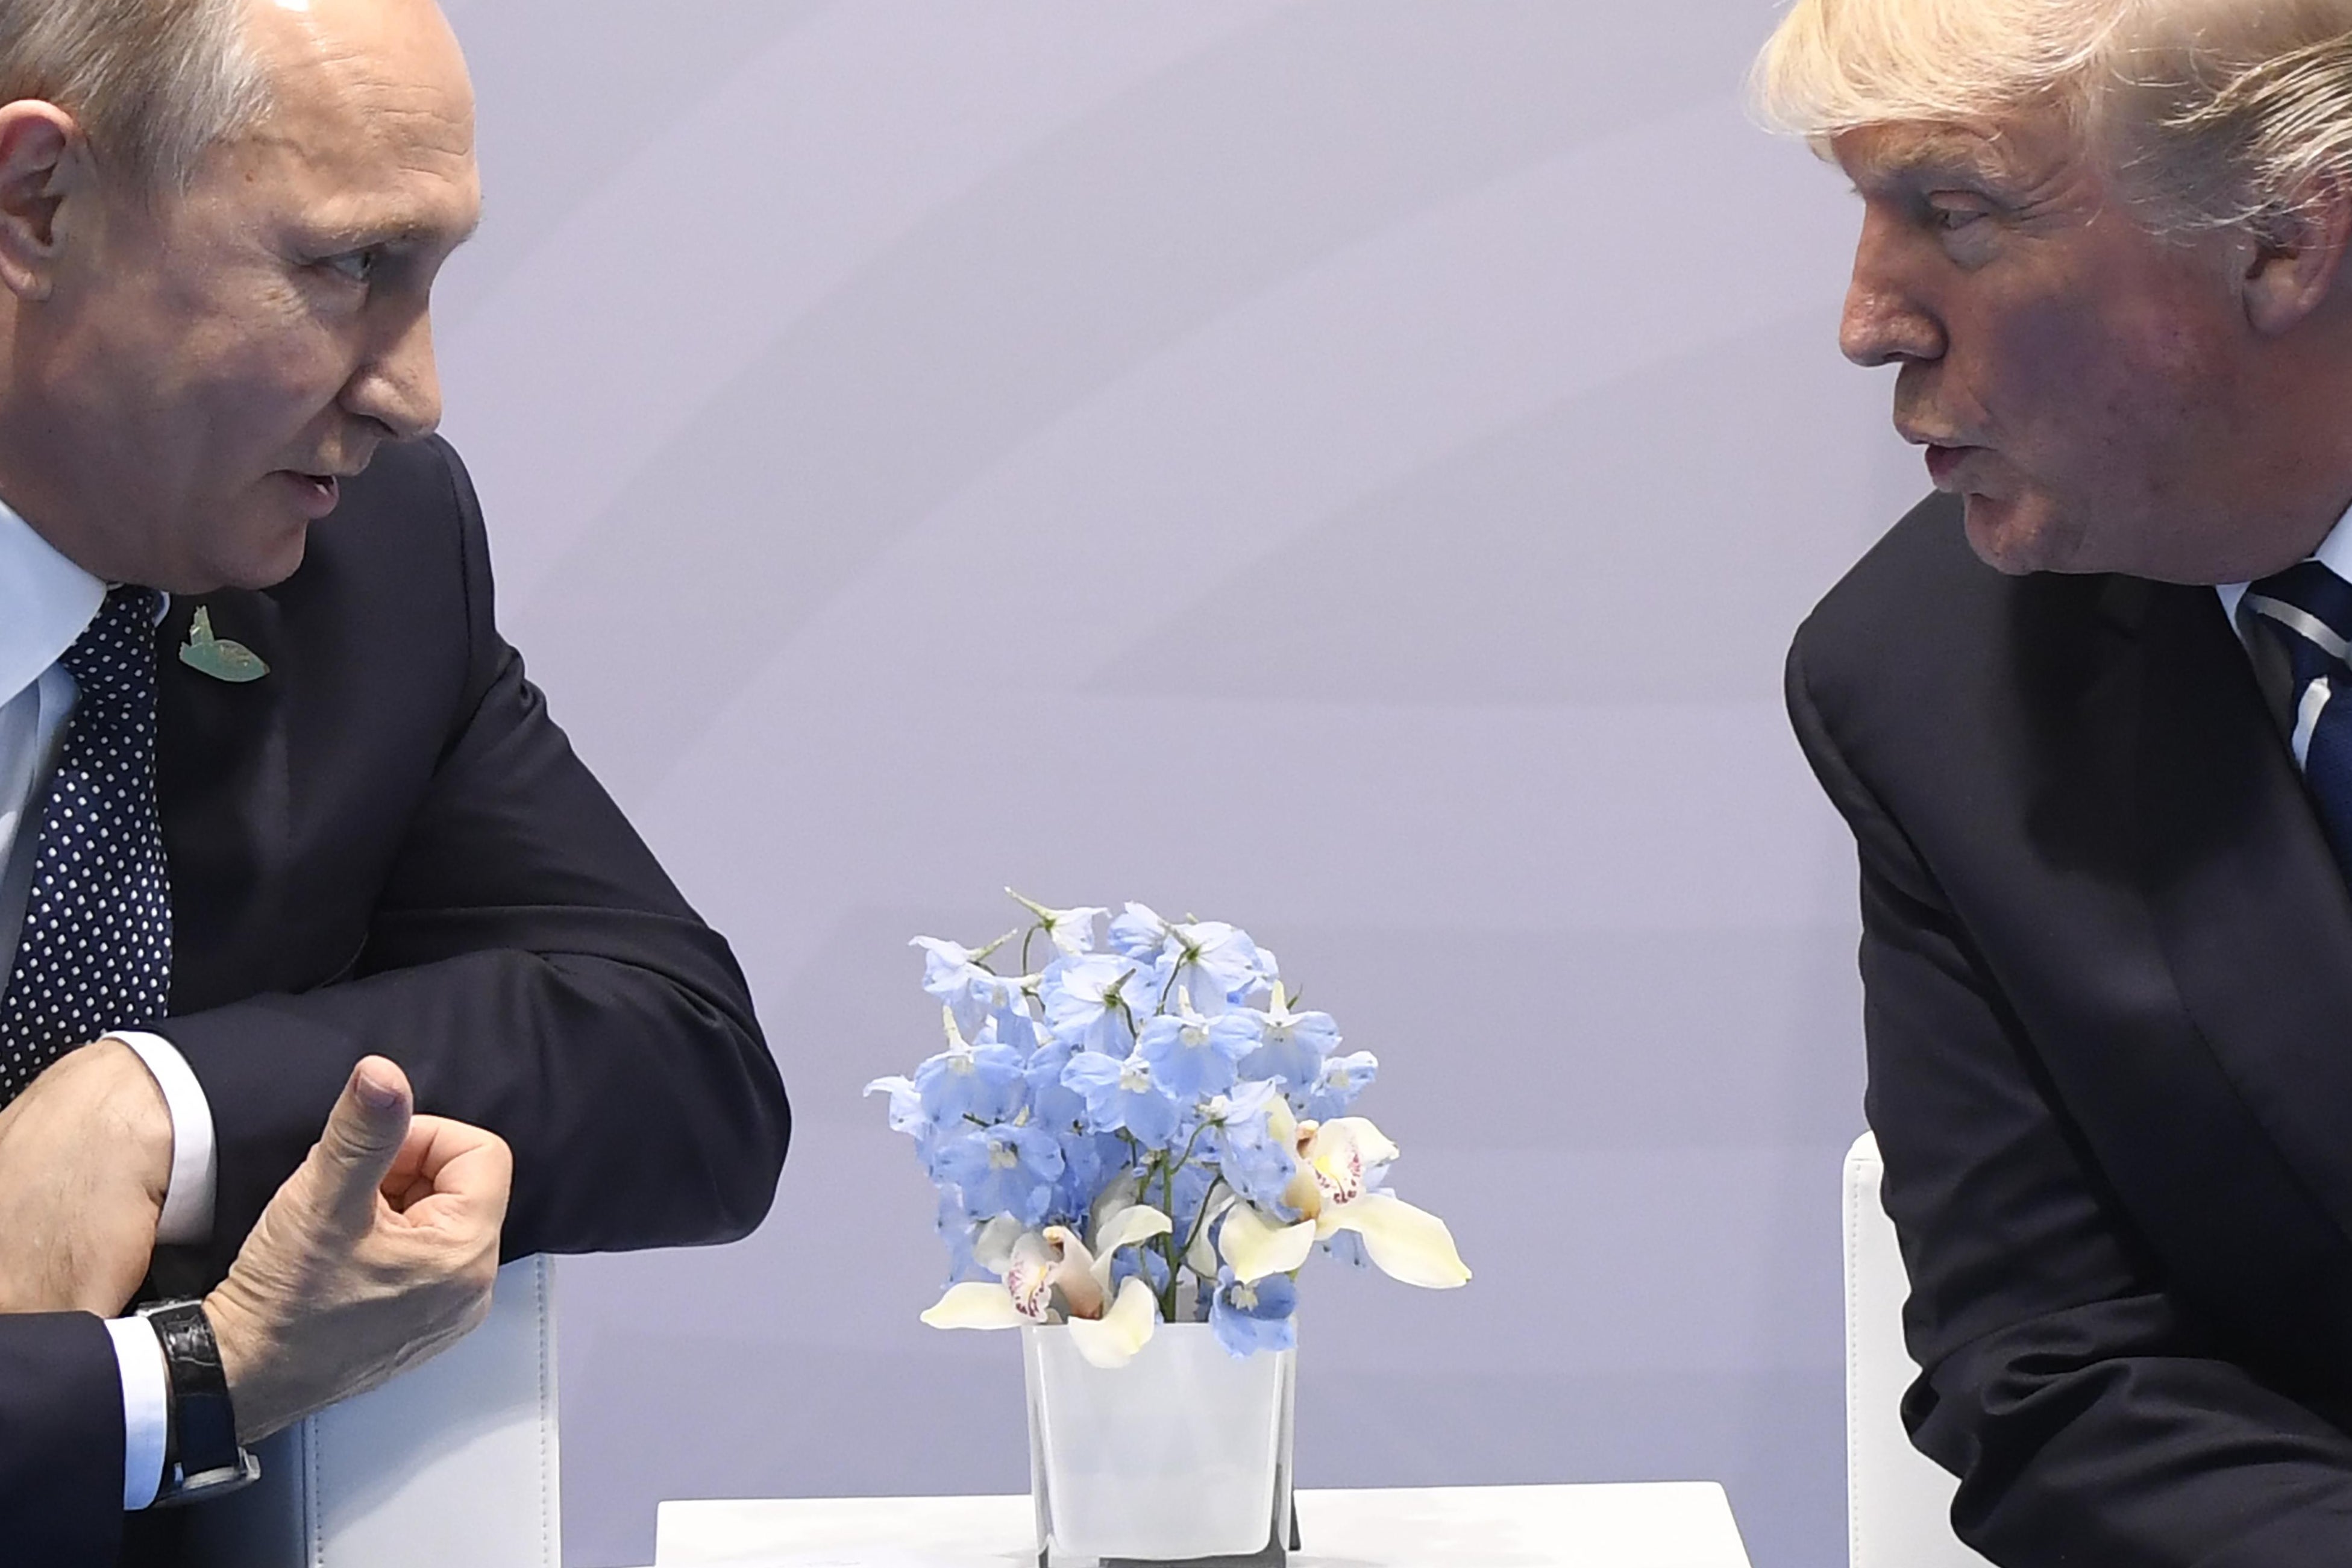 President Trump and President Putin lean in to have a quiet conversation on the sidelines of the G-20 Summit in Hamburg.